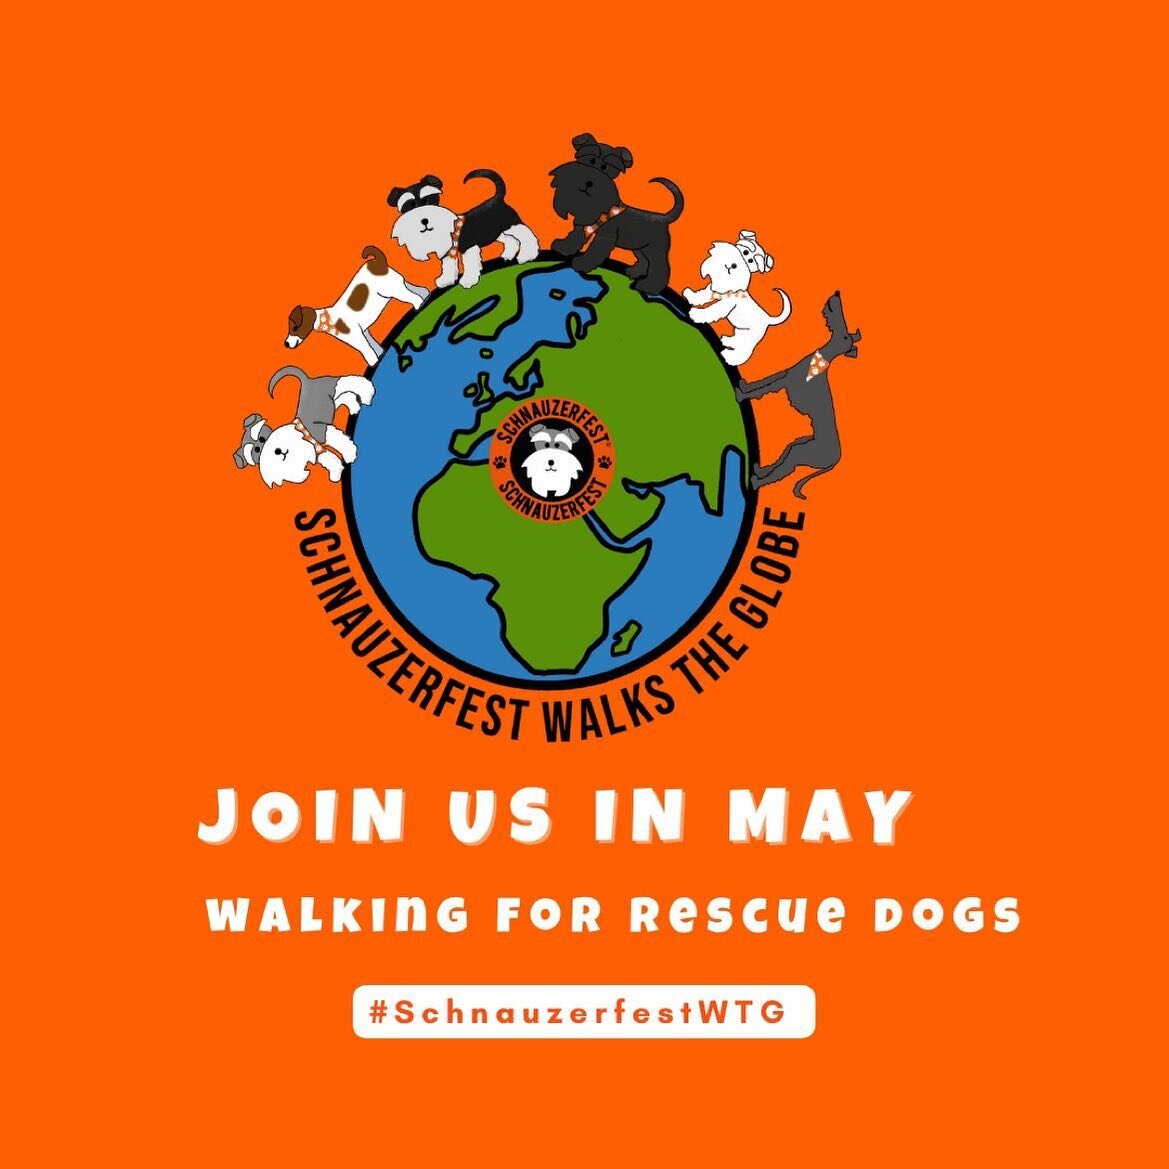 🧡NEW for May🧡 
Open now! 
If you are on our mailing list you'll have received details today of our big new MAY walking challenge. Take a look at our website for how to take part, we're ready for your pledges 😁 
https://www.schnauzerfest.org/walkst